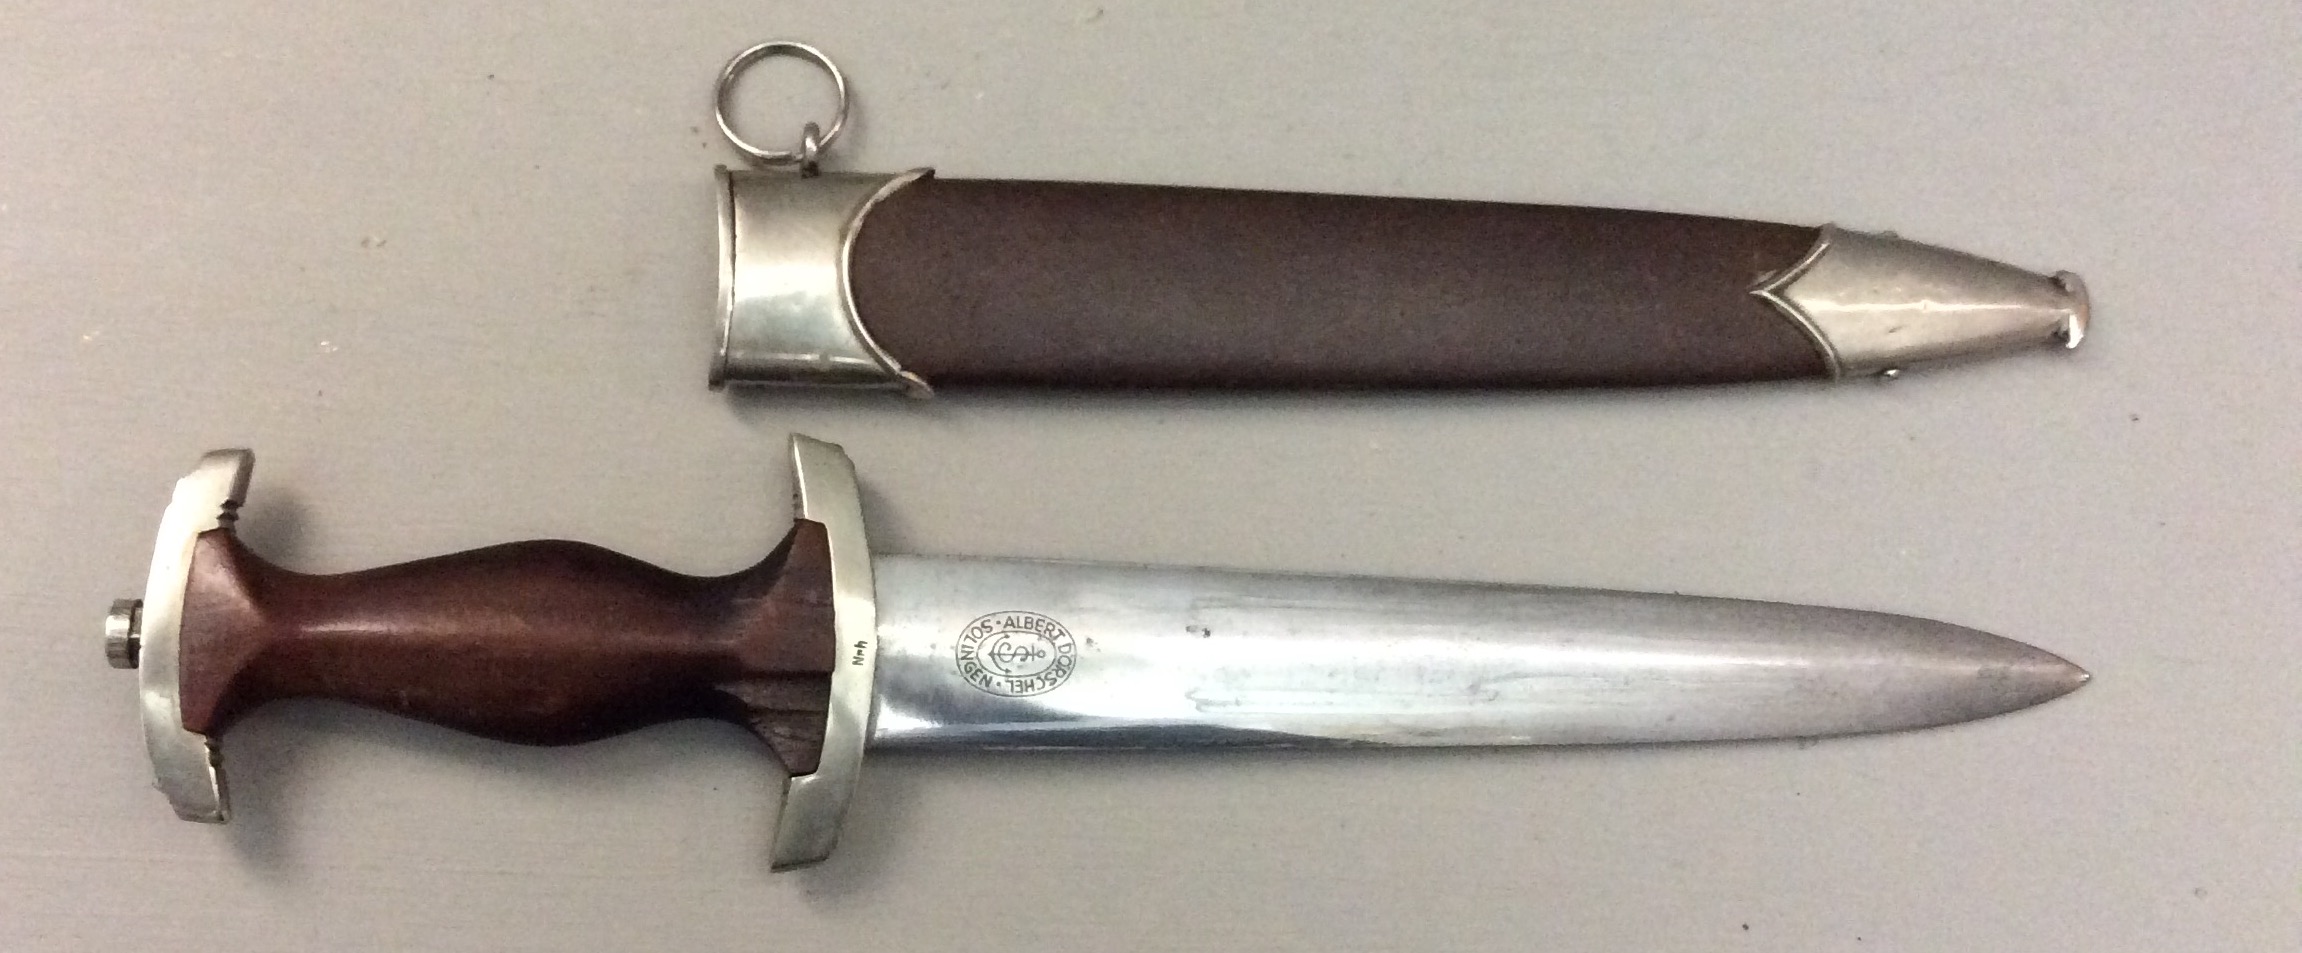 A WORLD WAR II GERMAN SA DAGGER Brown wooden grip with solid nickel fittings and brown leather - Image 6 of 10